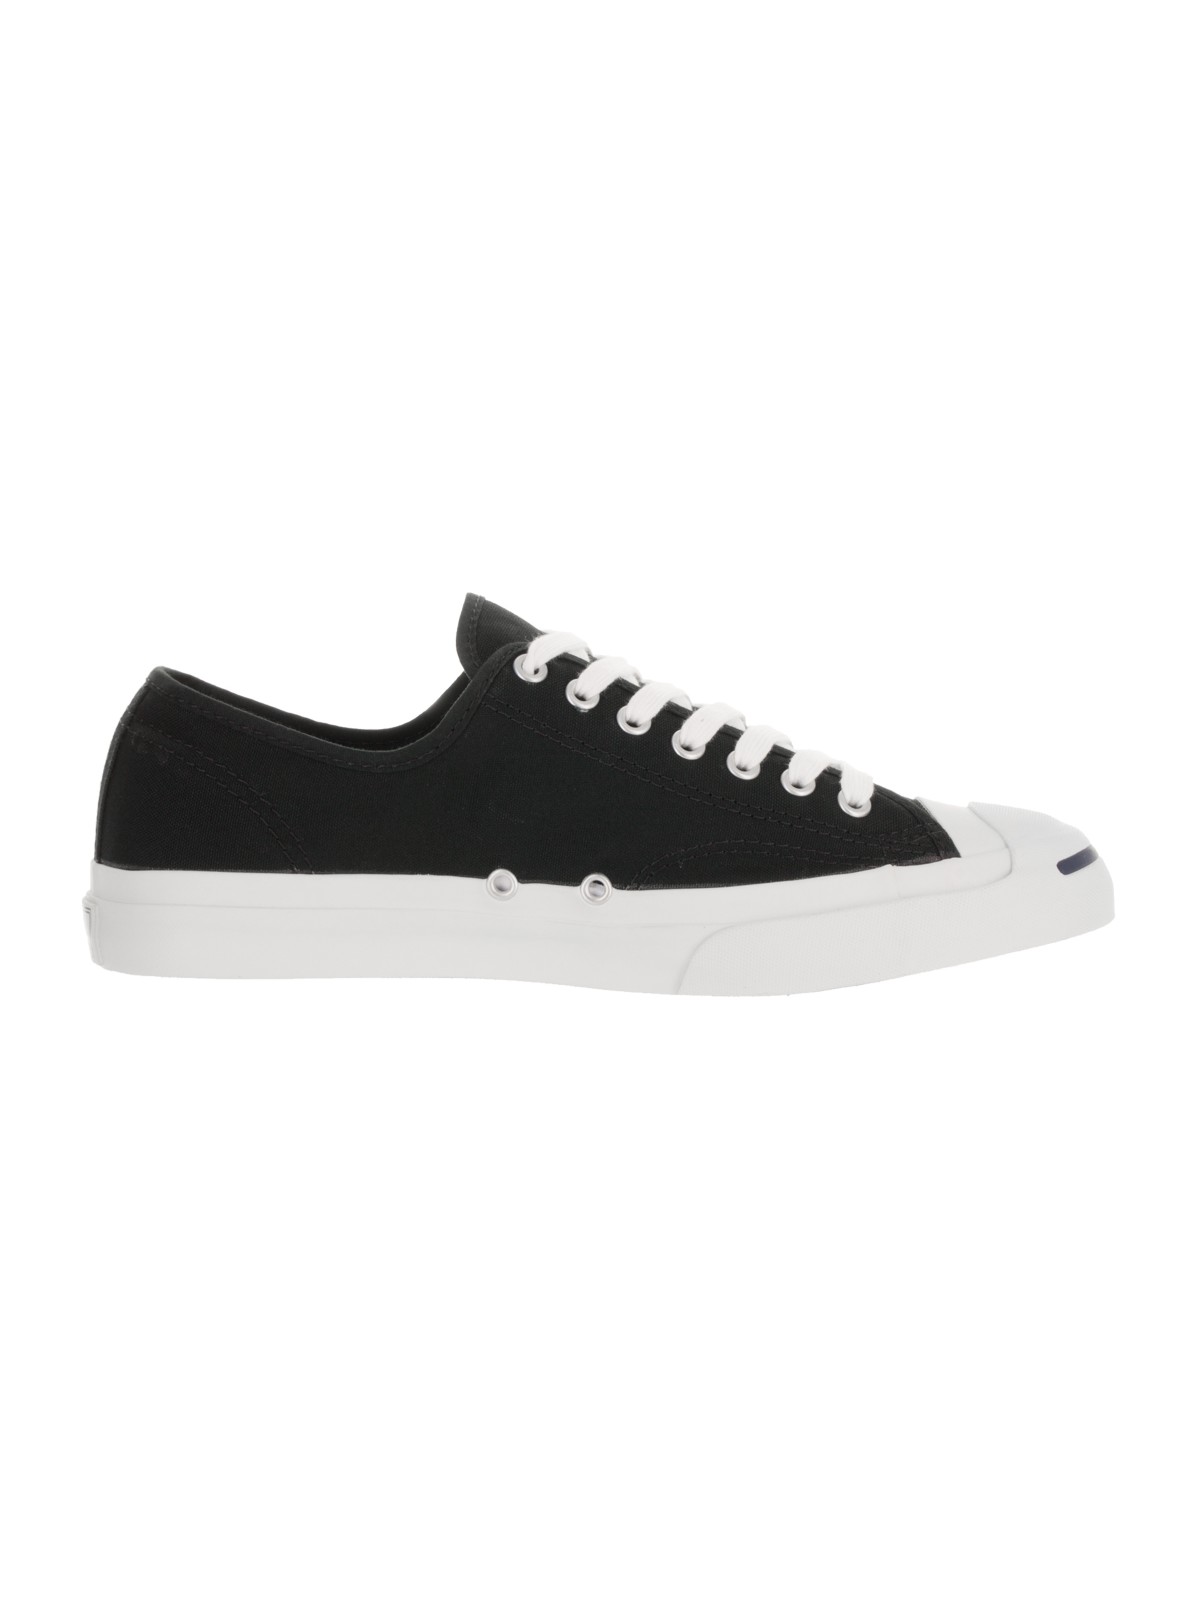 Converse Unisex Jack Purcell Cp Ox Casual Shoe - image 2 of 5